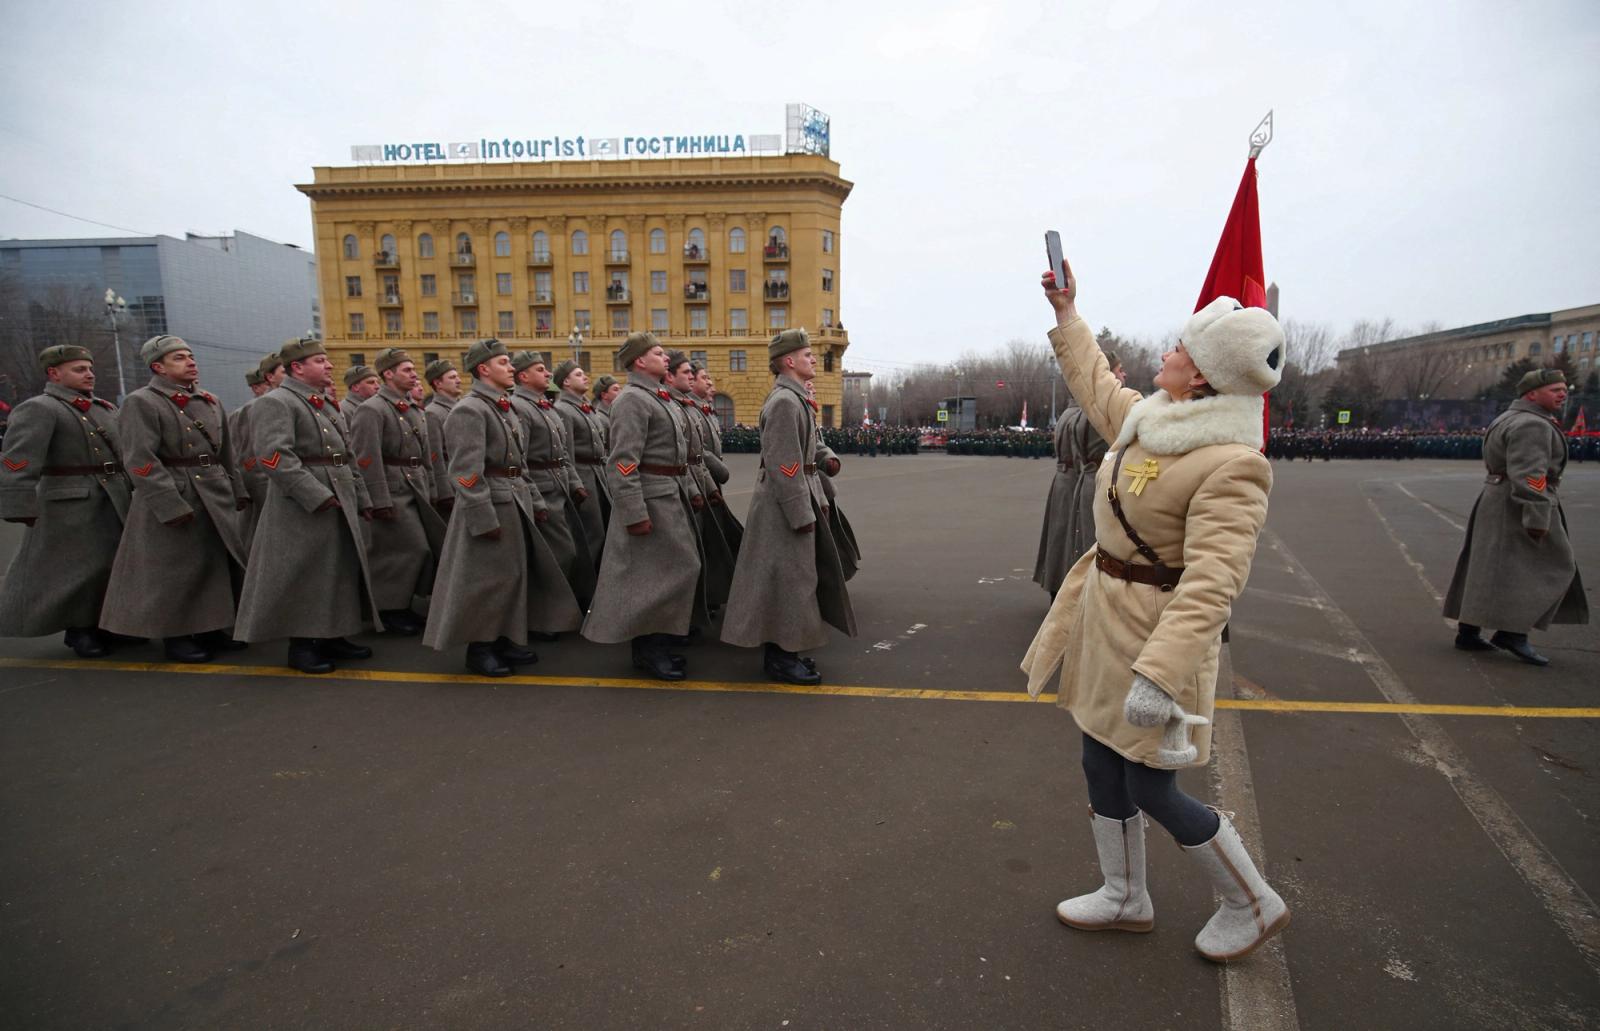 Participants dressed in historical uniforms march during a military parade marking the 80th anniversary of the victory of Red Army over Nazi Germany's troops in the Battle of Stalingrad during World War Two